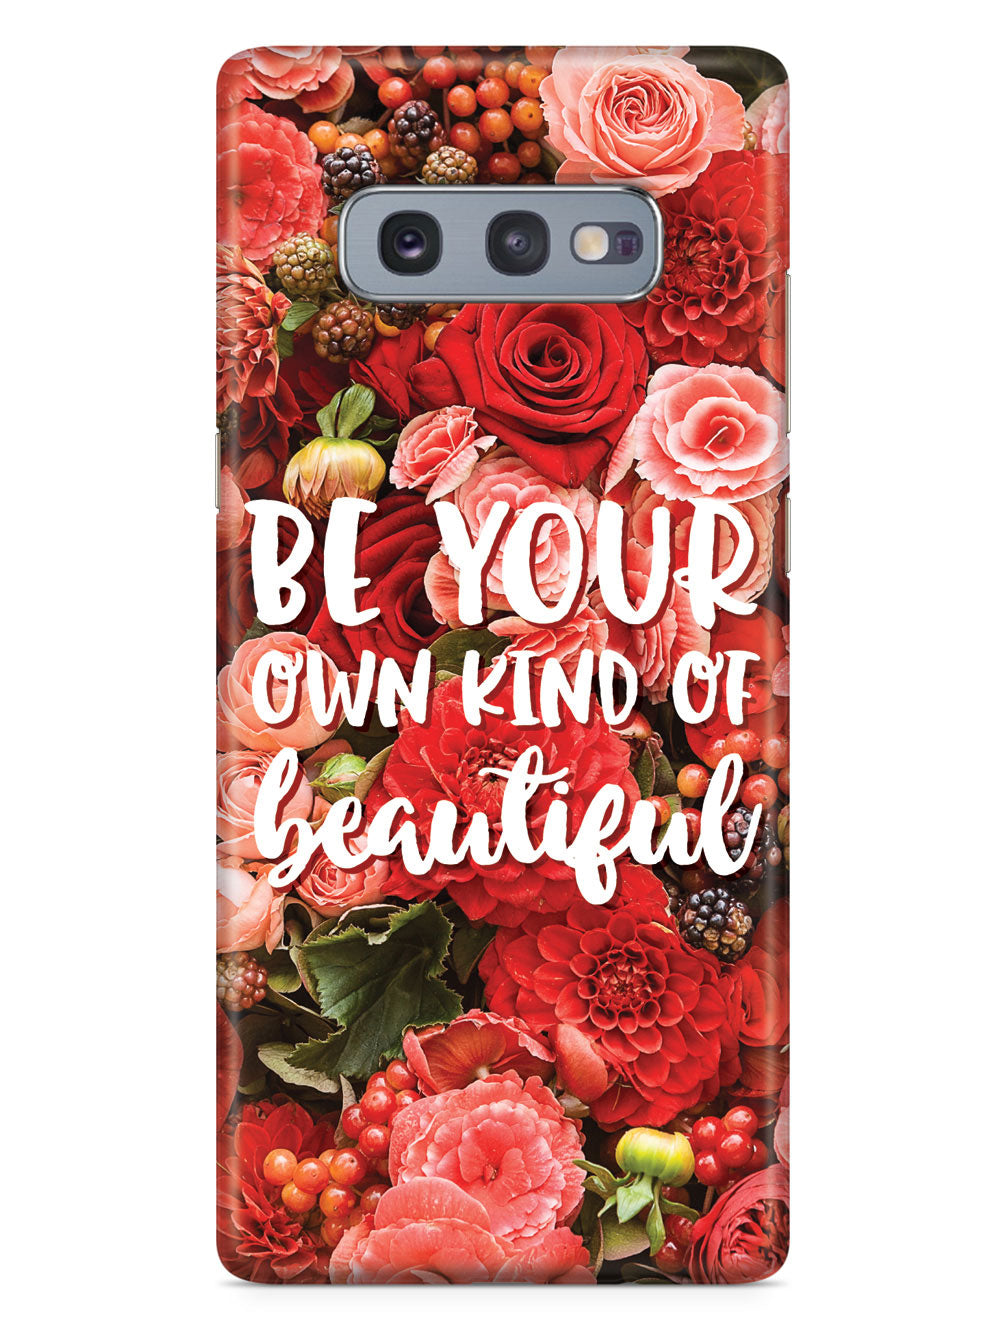 Be Your Own Kind of Beautiful - Red Flower Background Case